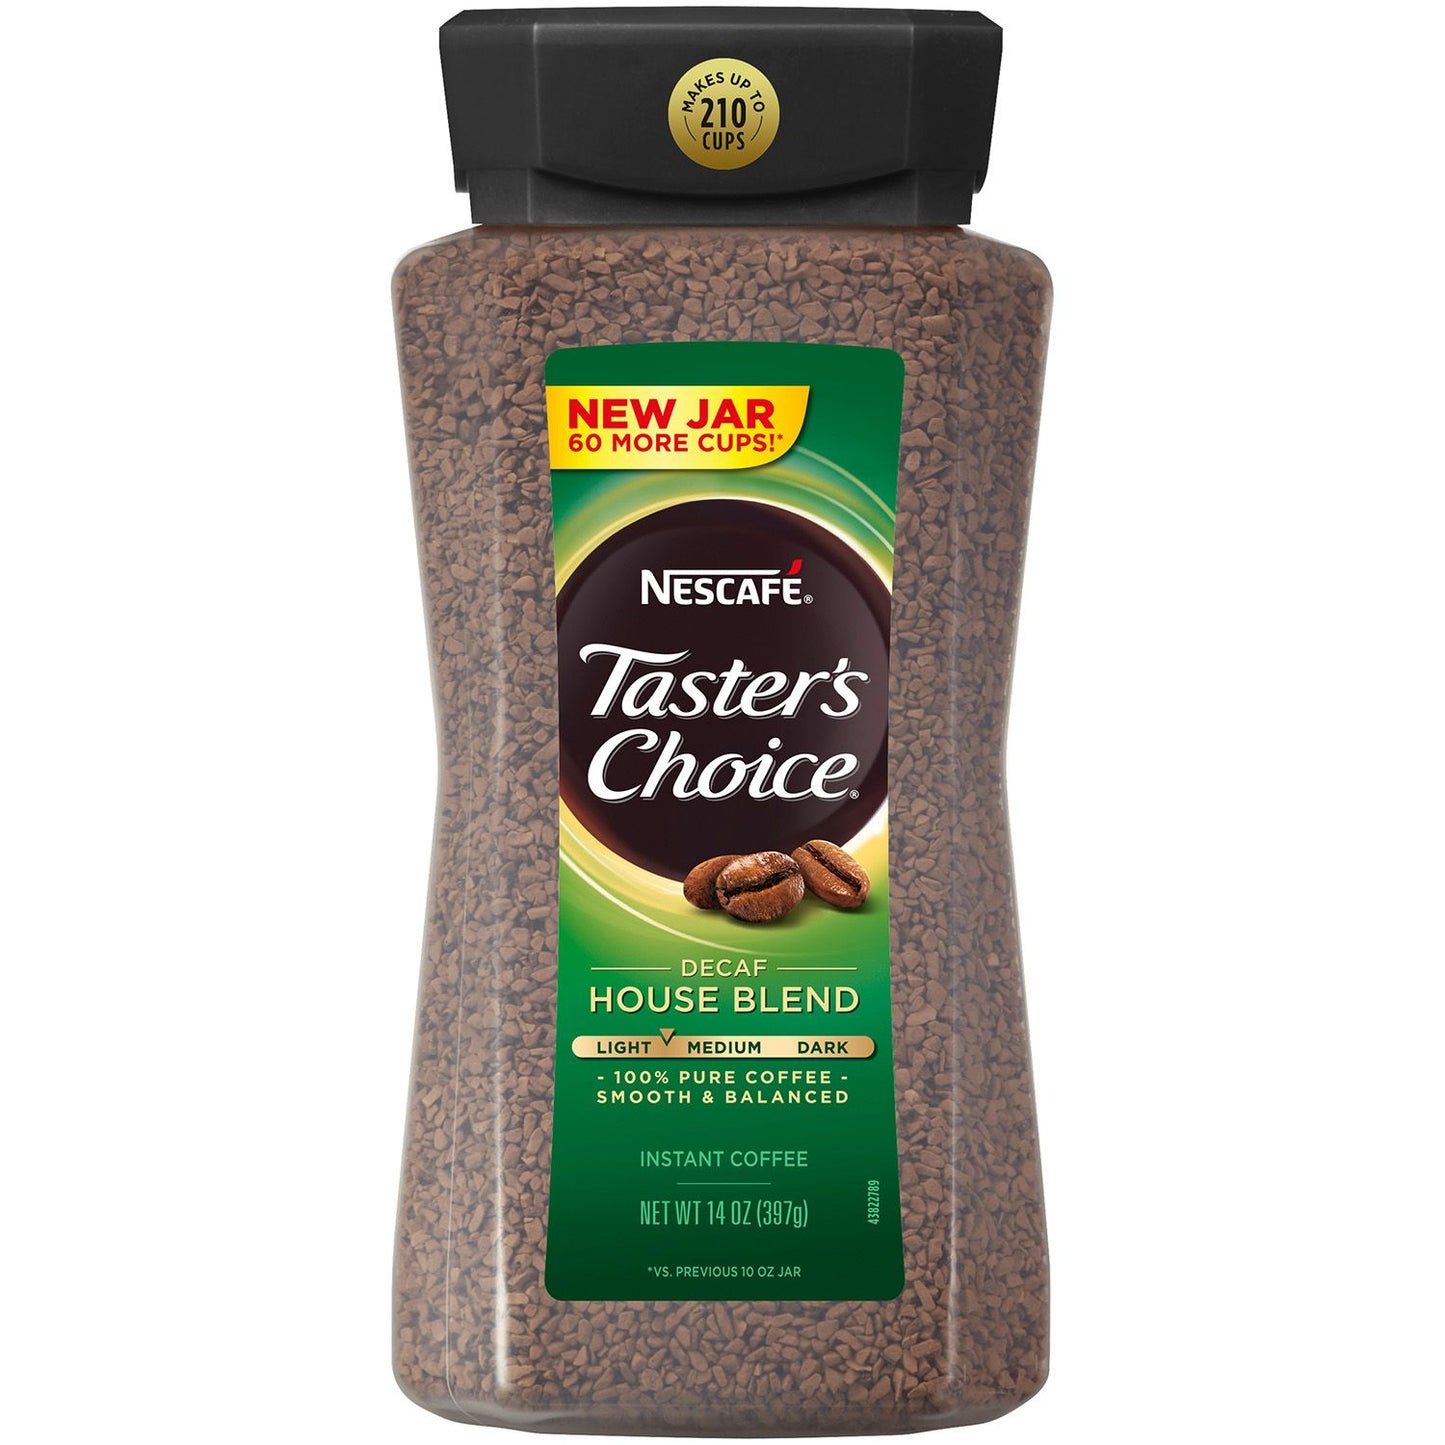 NESCAFE TASTER'S CHOICE Decaffeinated Instant Coffee, House Blend (14 oz.)